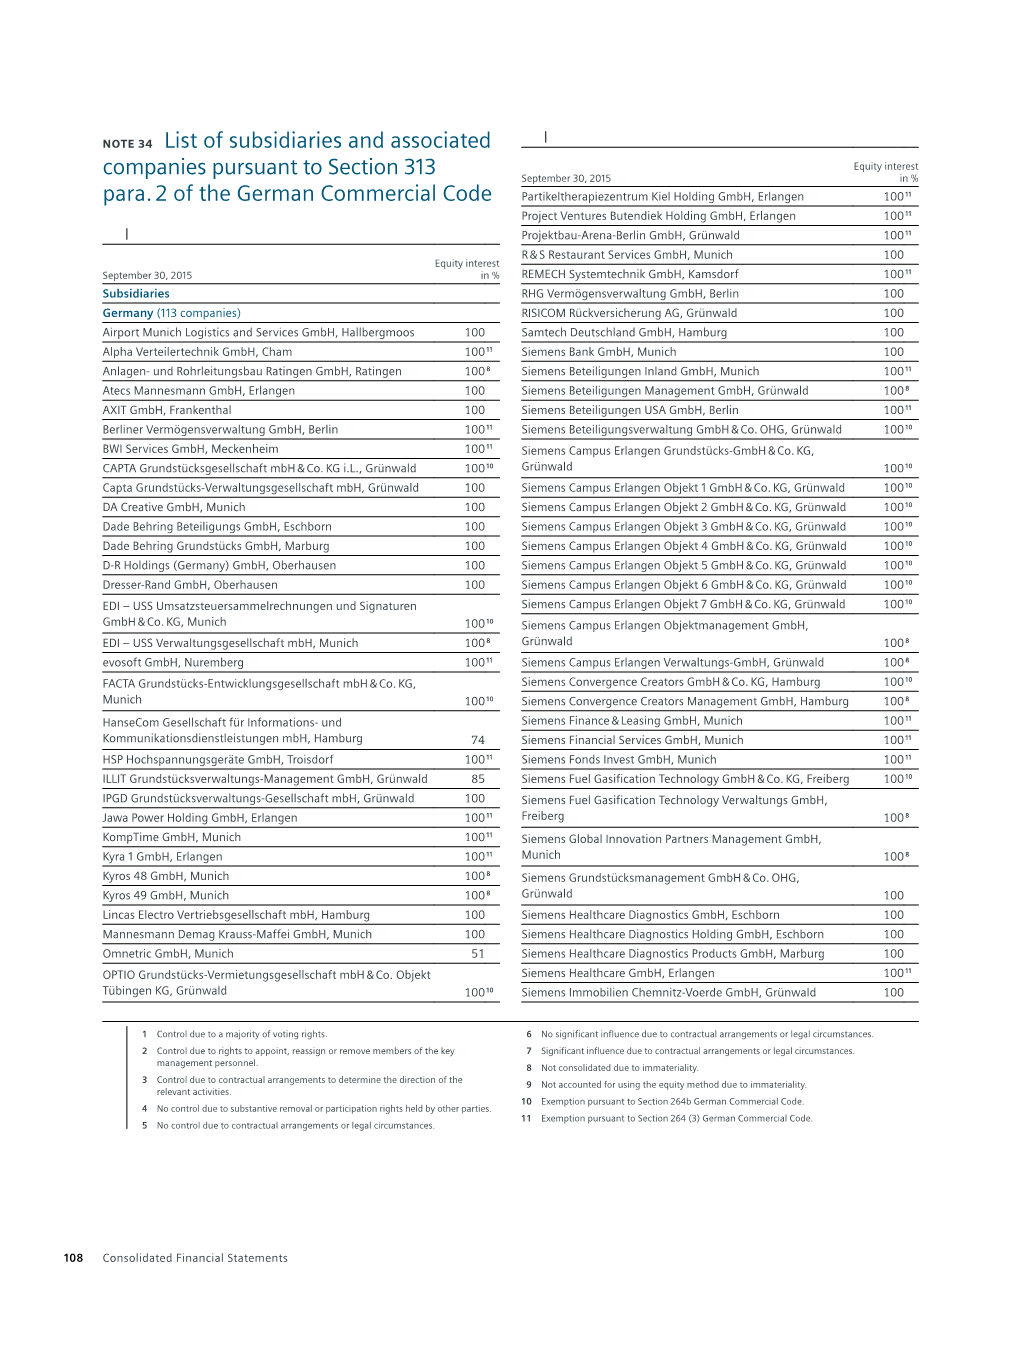 Siemens Annual Report 2015, List of Subsidiaries and Associated